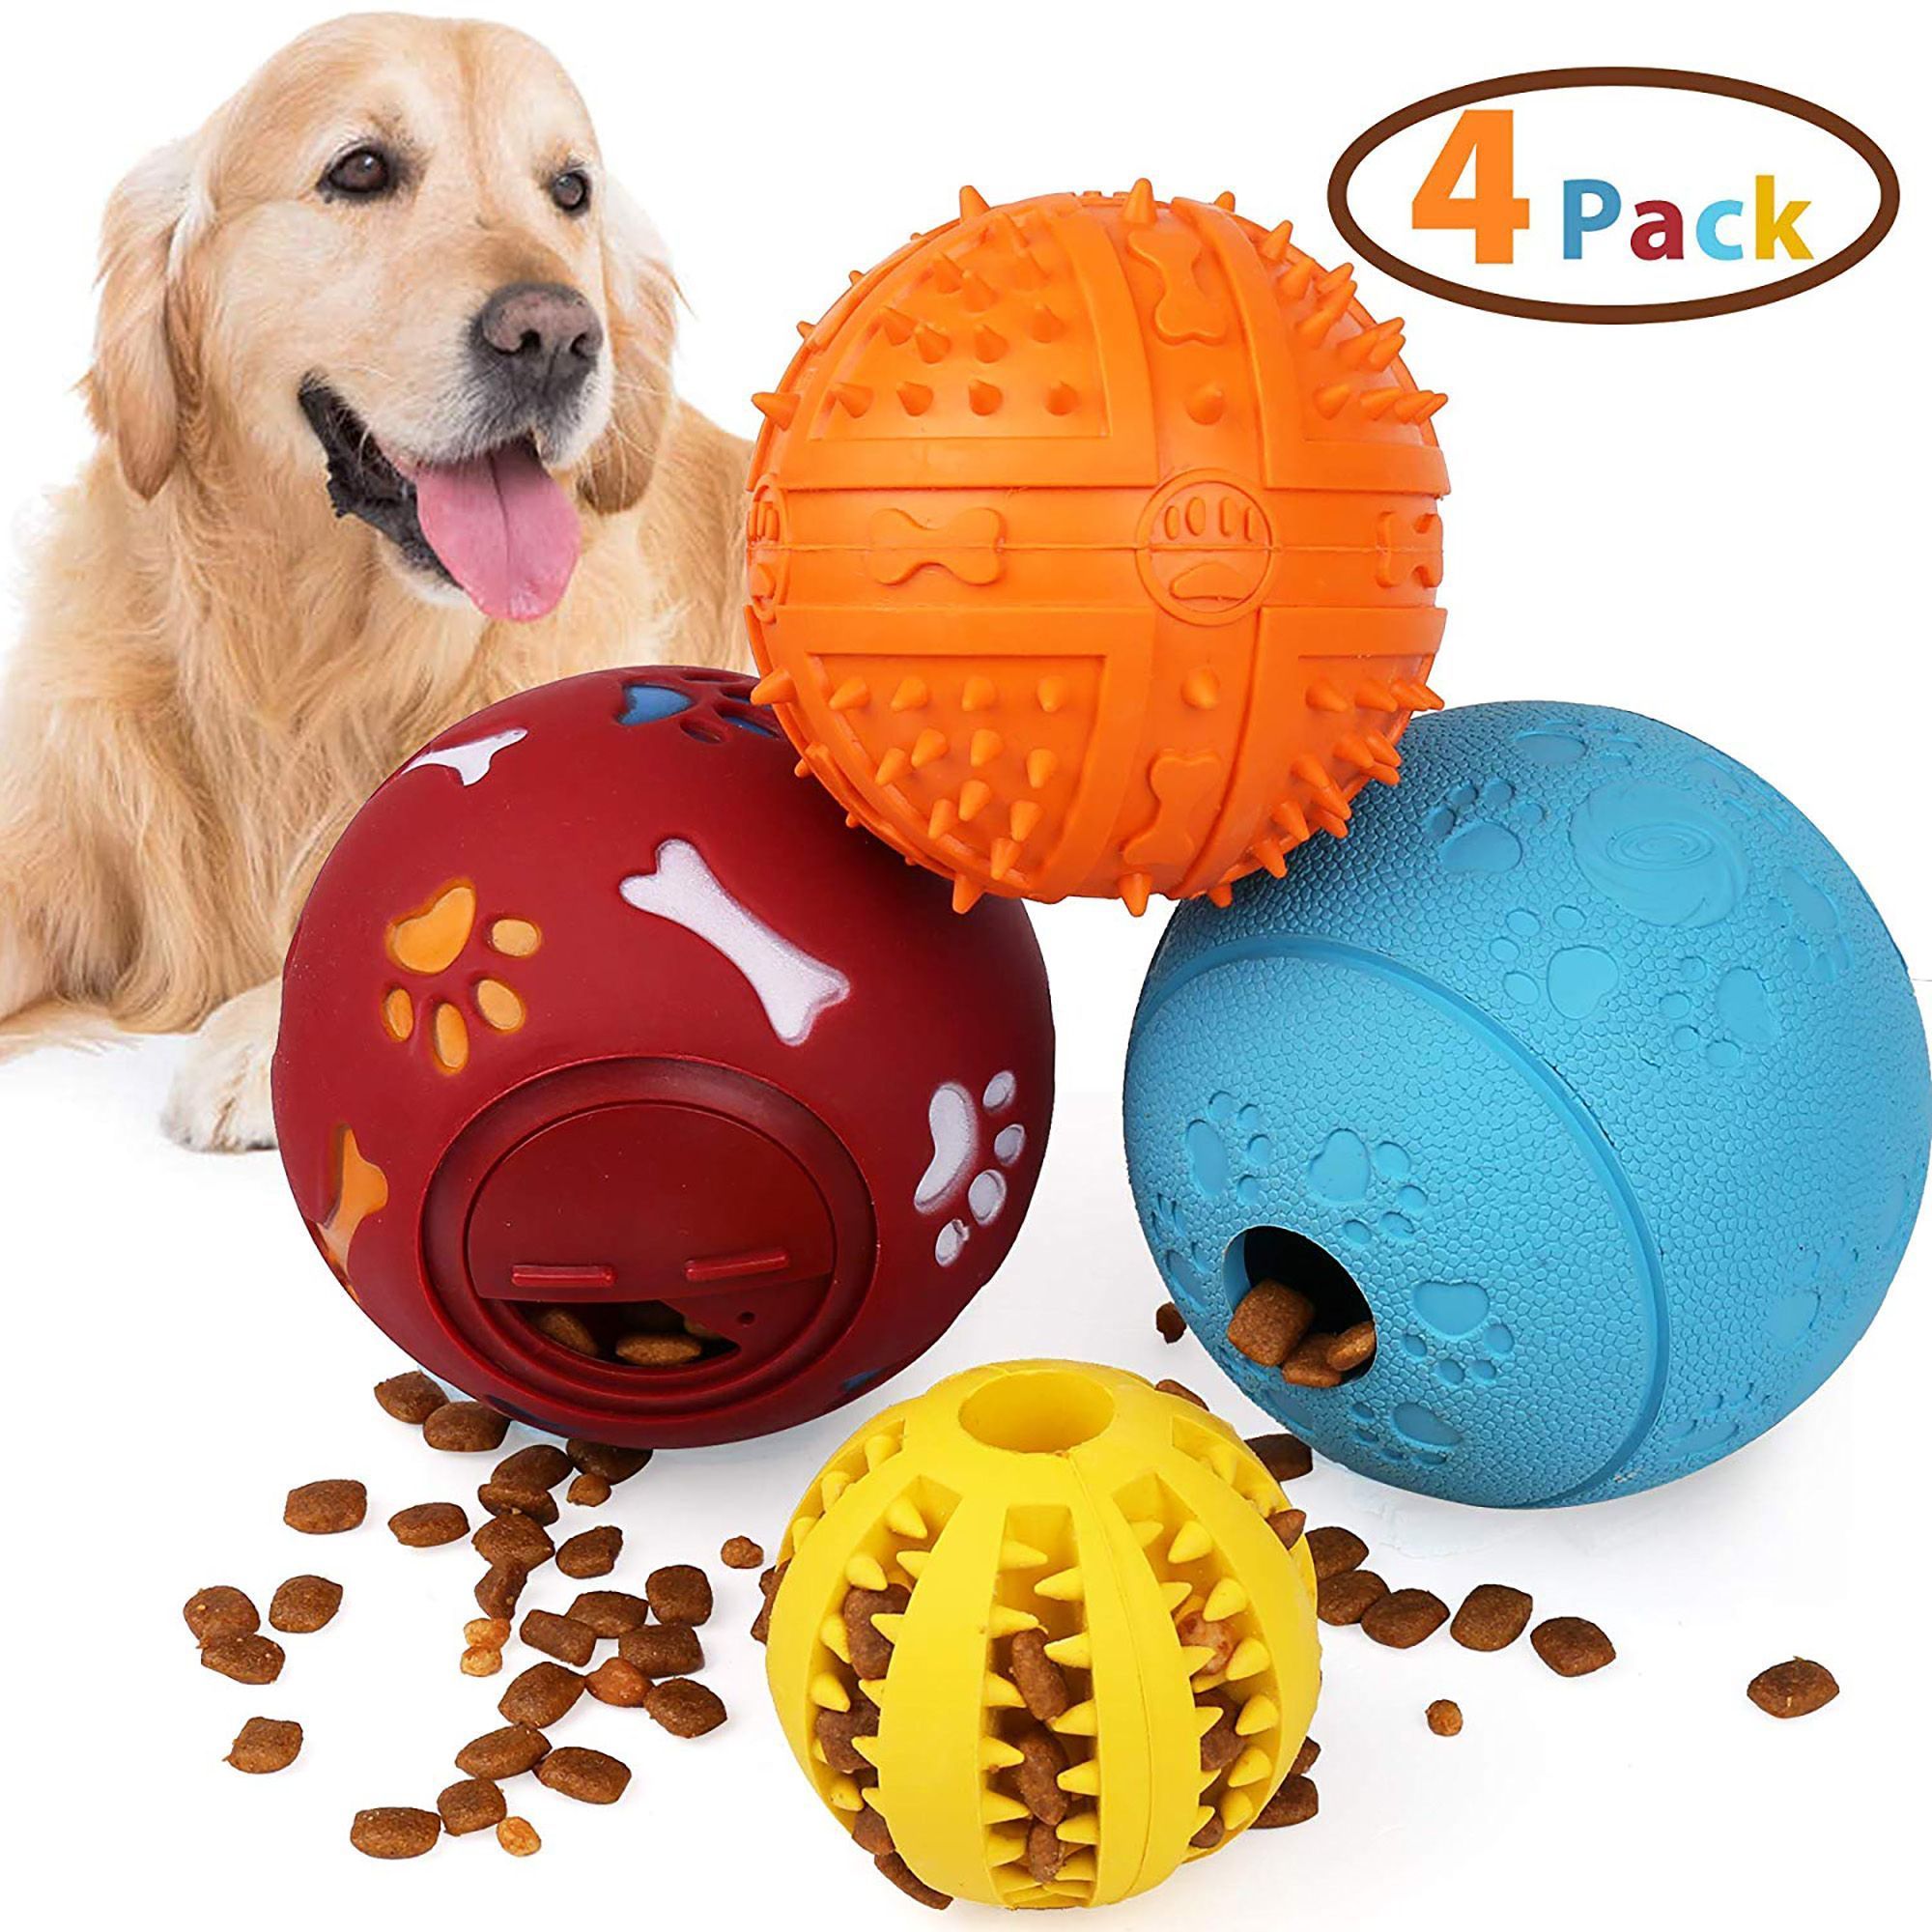 Red Tricky Treat Ball for Toss and Fetch Play Pack of 1